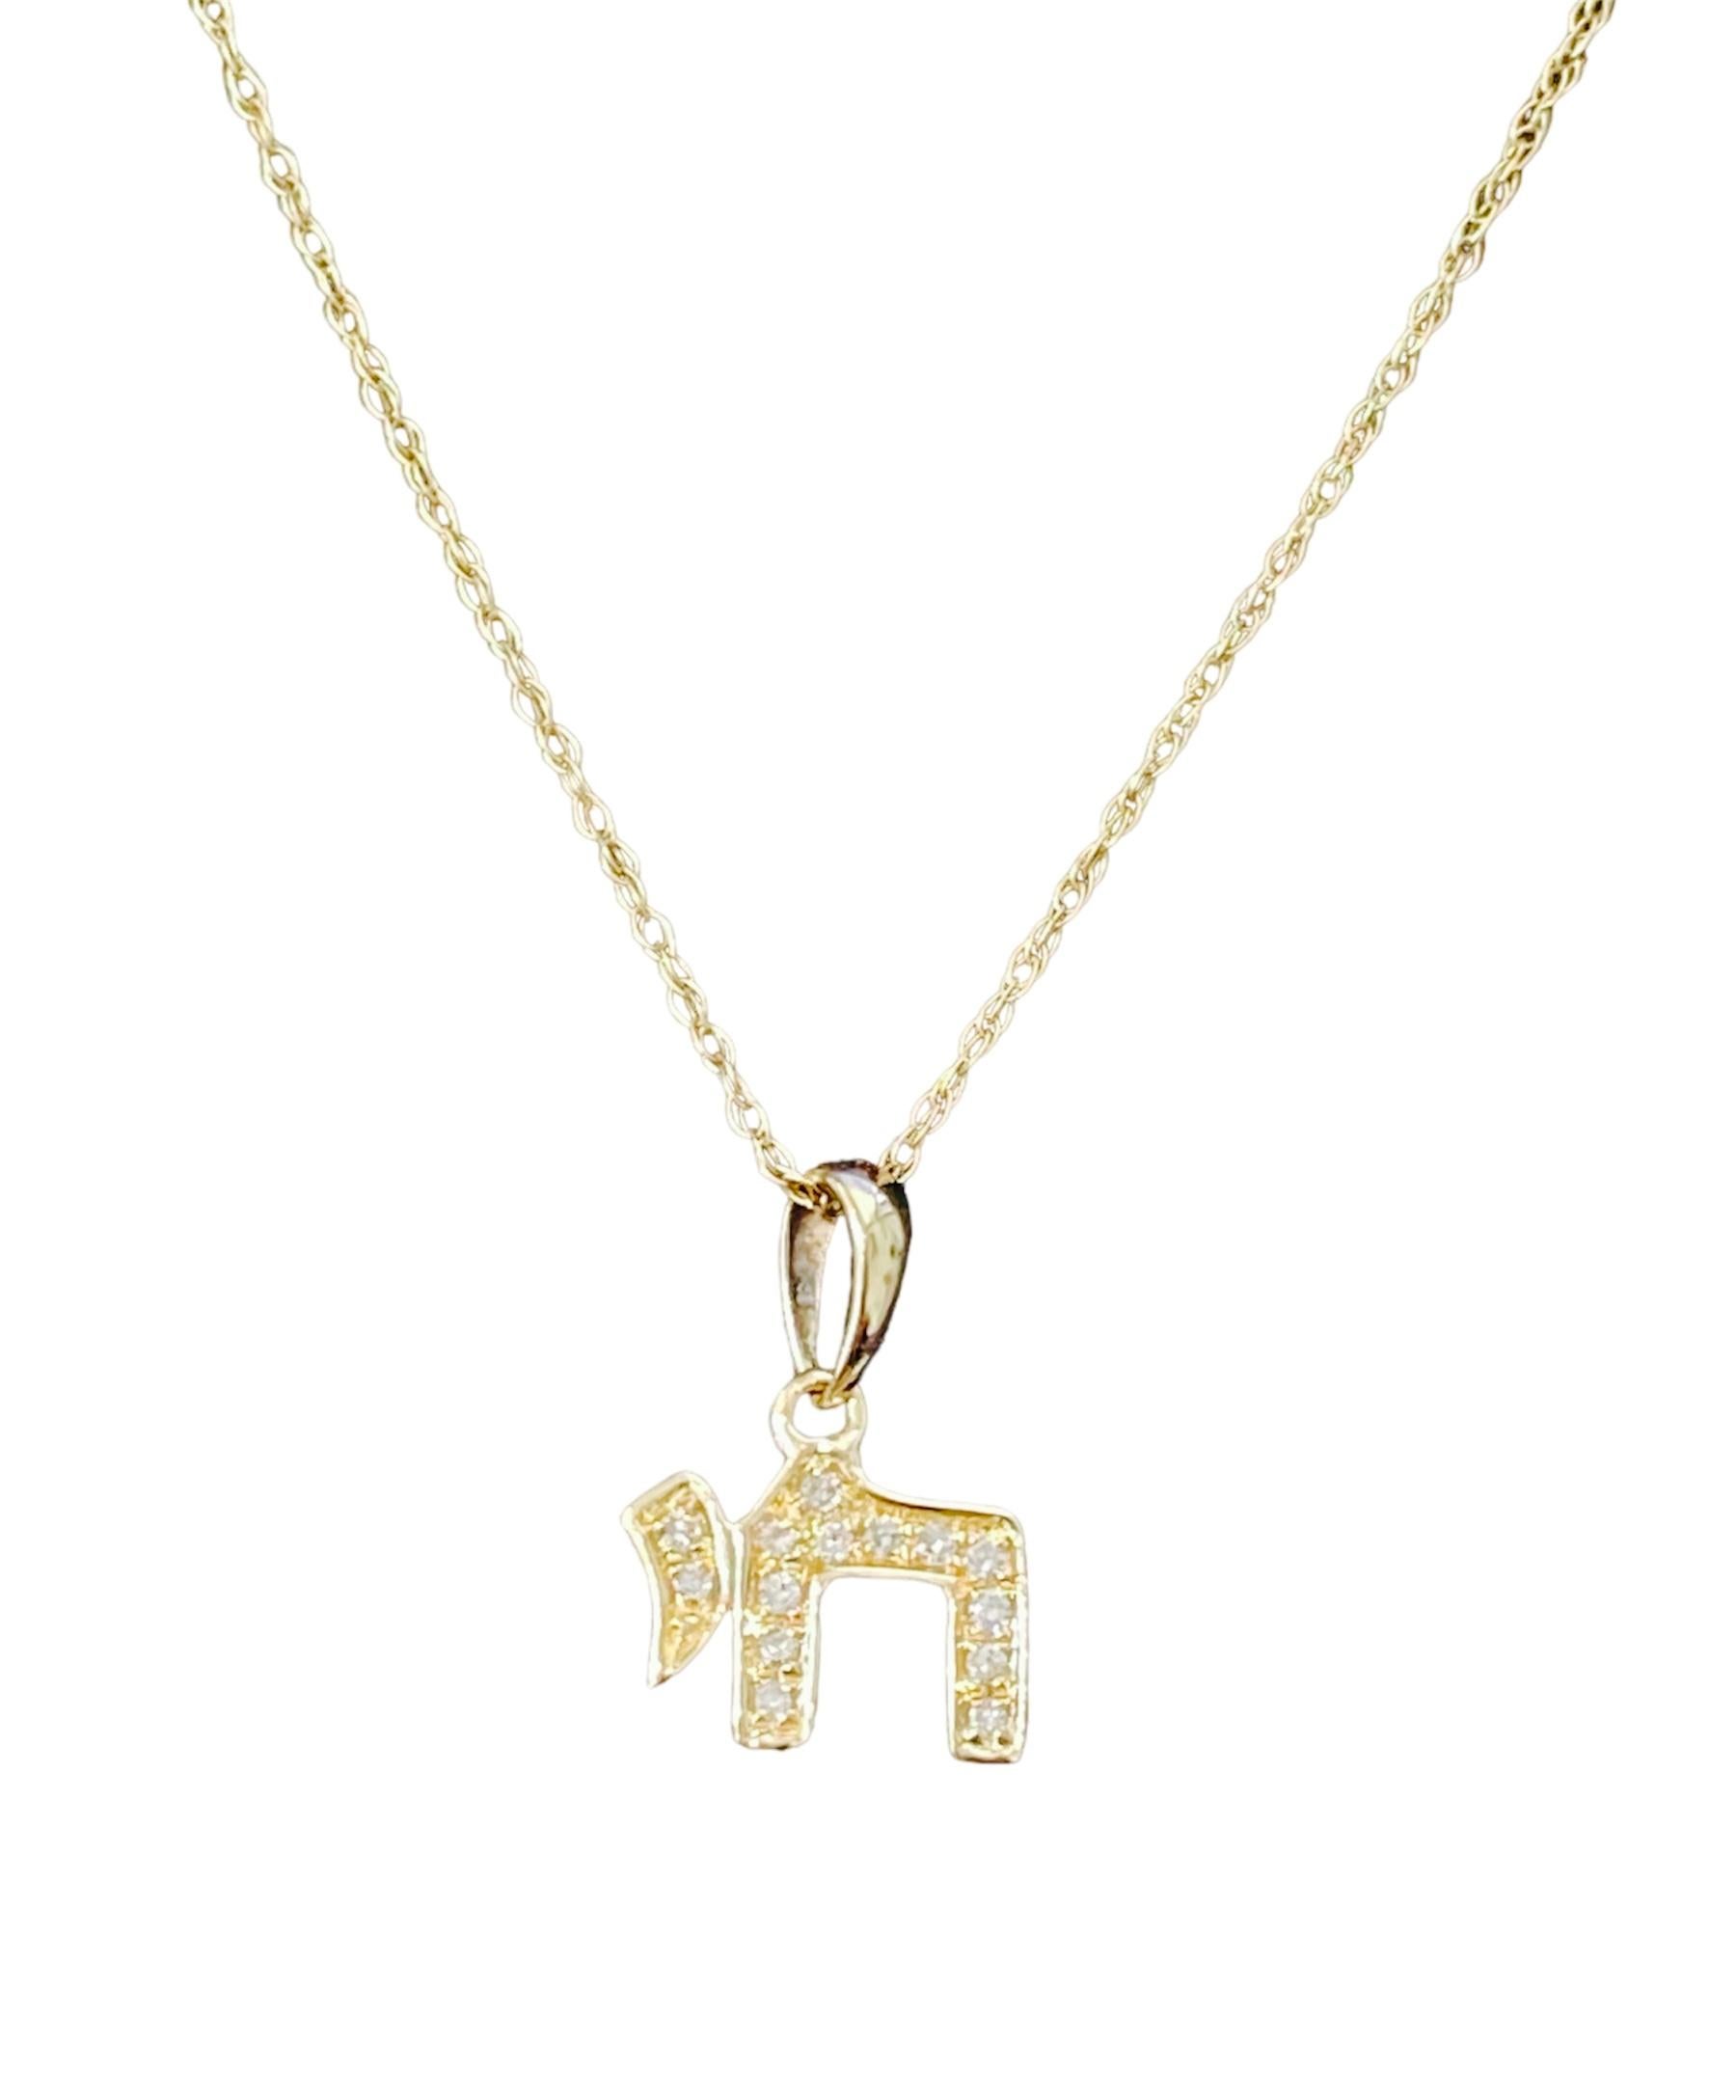 14K Chai Hebrew Natural Diamond Pendant is a stunning and meaningful piece of jewelry that artfully combines cultural significance with timeless elegance.
This pendant is crafted from high-quality 14-karat gold, featuring the Hebrew word
